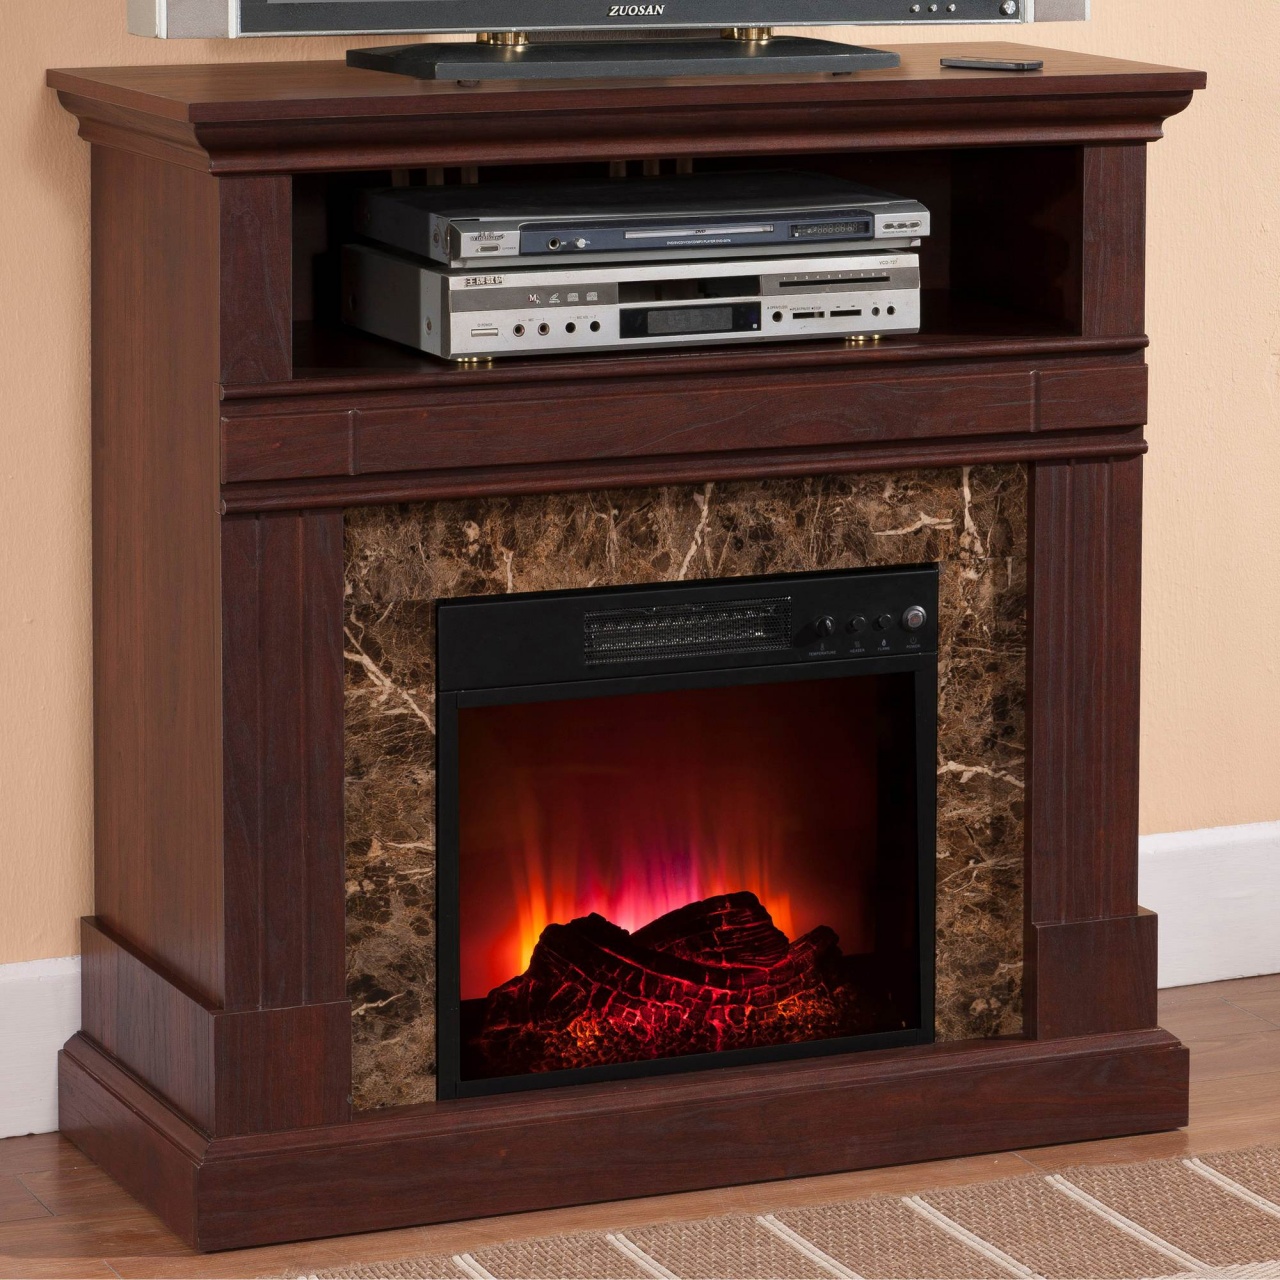 Fireplace with Herringbone Tile Best Of Tv Stand with Fireplace Costco – Fireplace Ideas From "tv